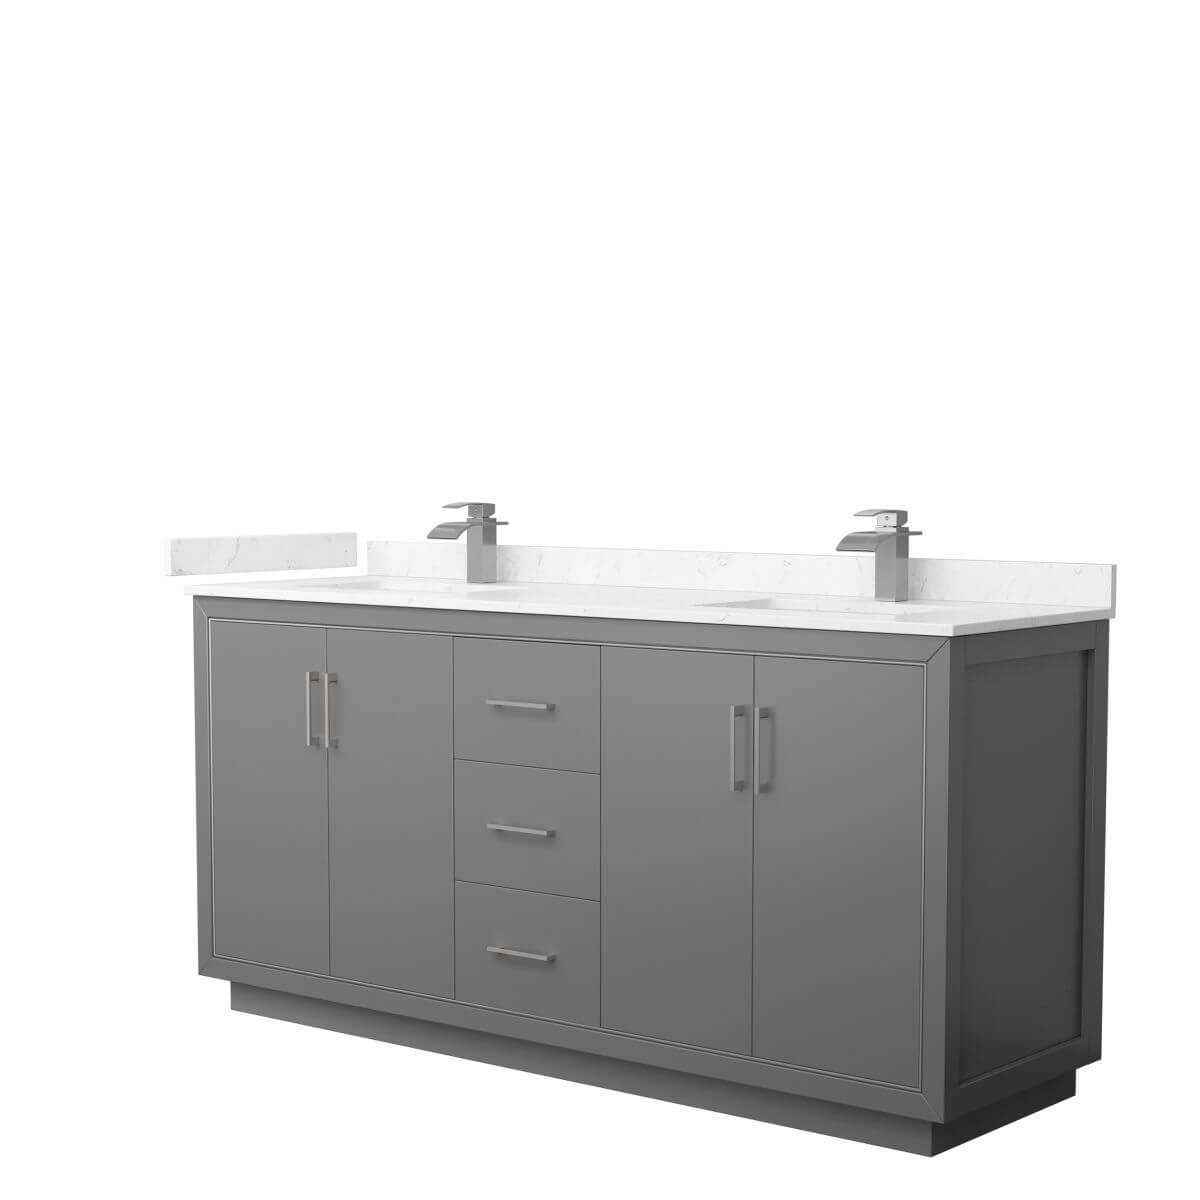 Wyndham Collection WCF111172DKGC2UNSMXX Icon 72 inch Double Bathroom Vanity in Dark Gray with Carrara Cultured Marble Countertop, Undermount Square Sinks and Brushed Nickel Trim